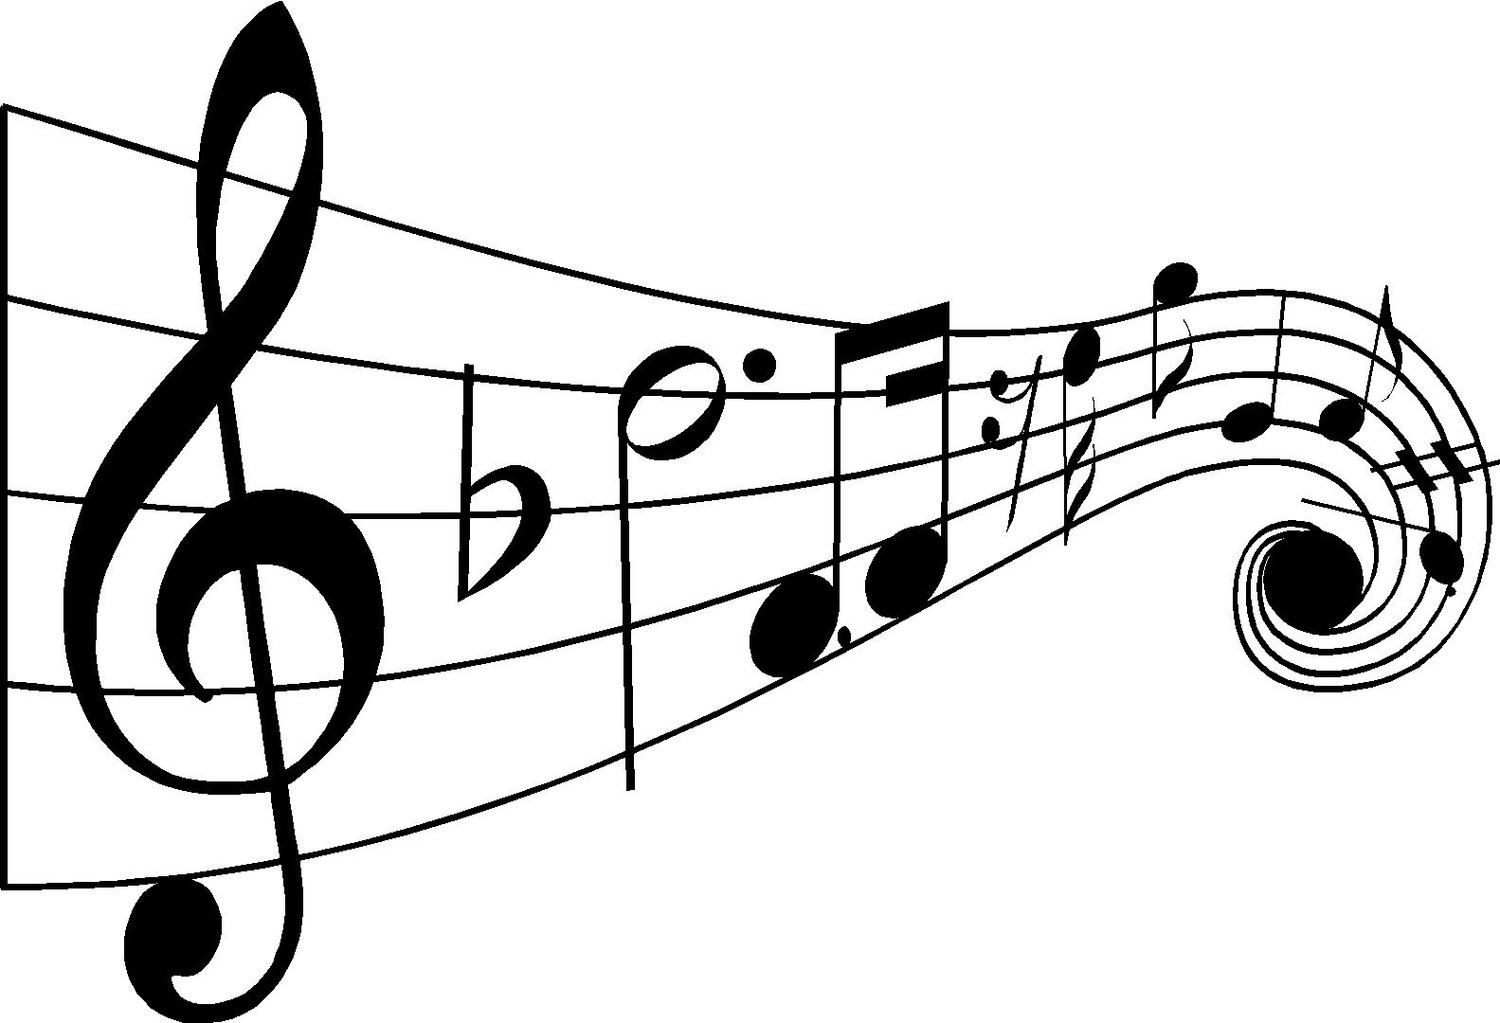 Black And White Music Notes - Clipartion.com